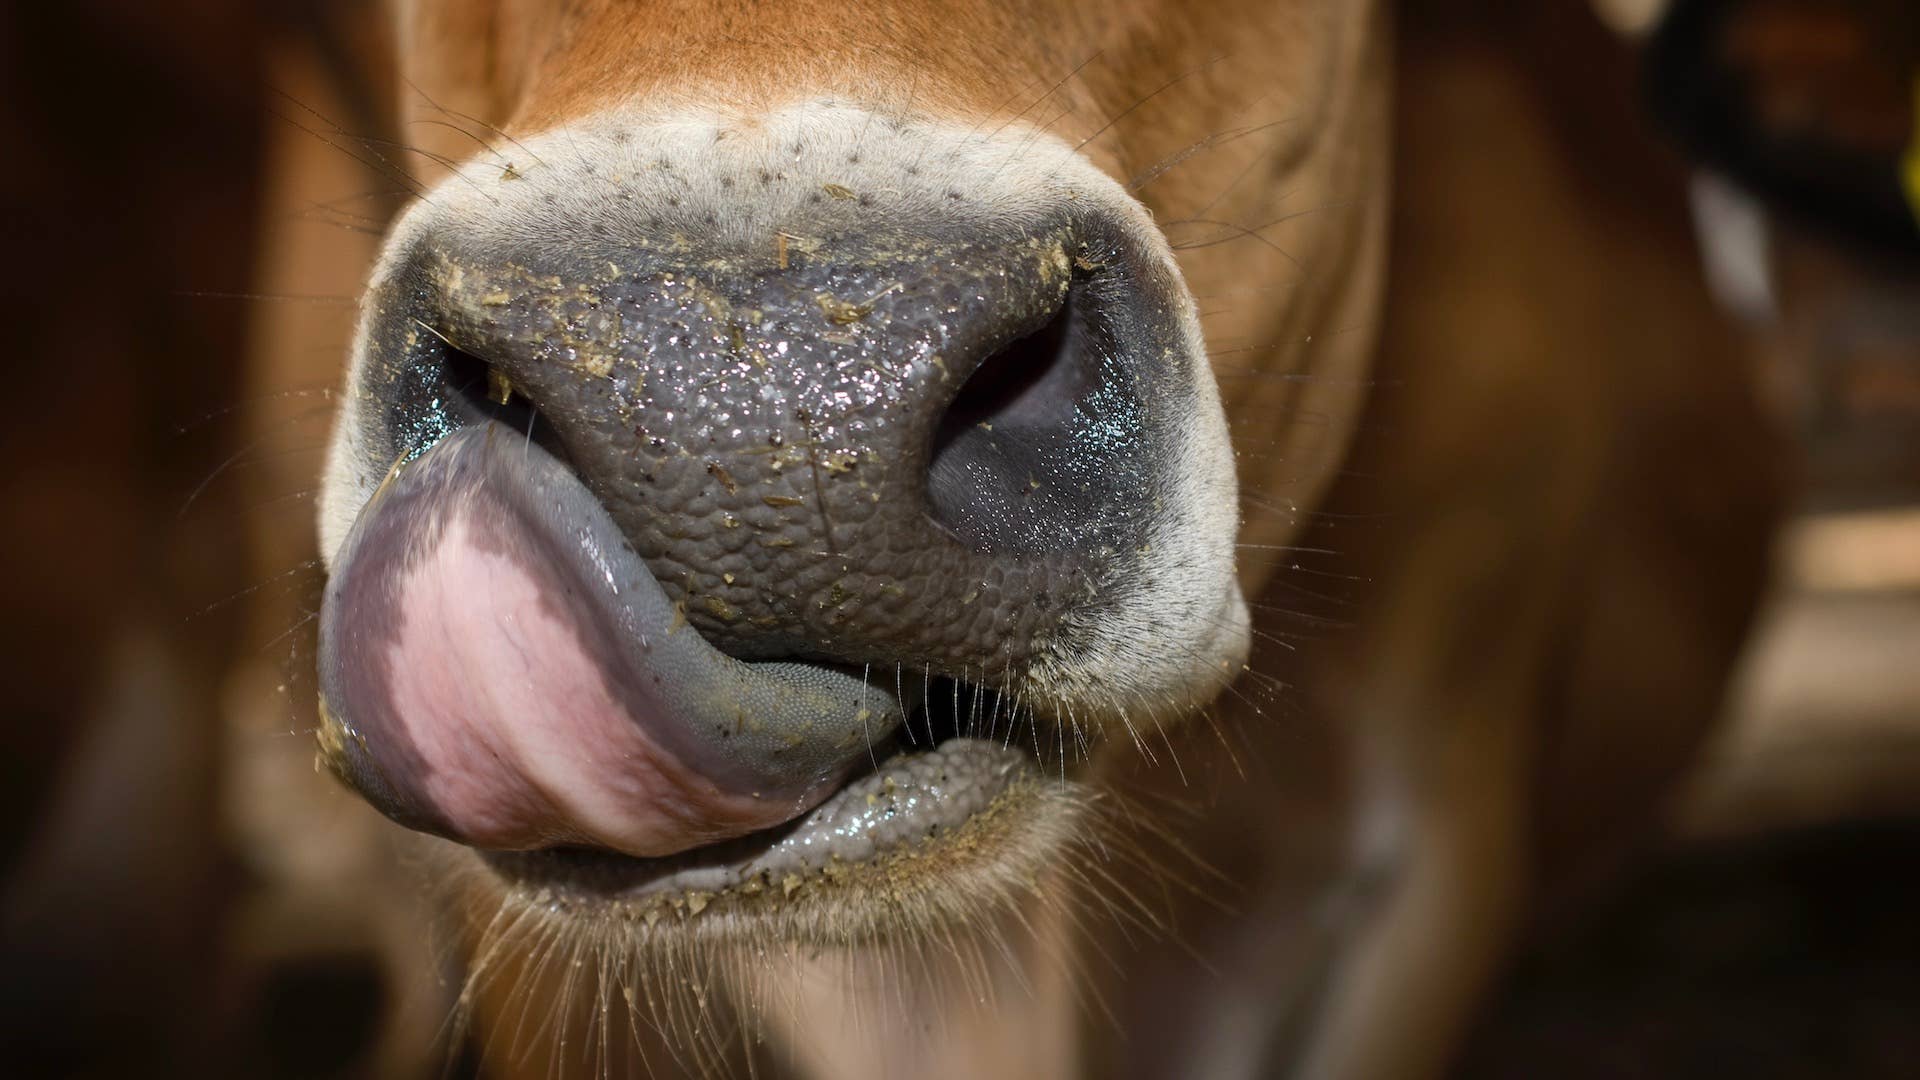 Scientists in China Say They’ve Successfully Cloned 3 ‘Super Cows’